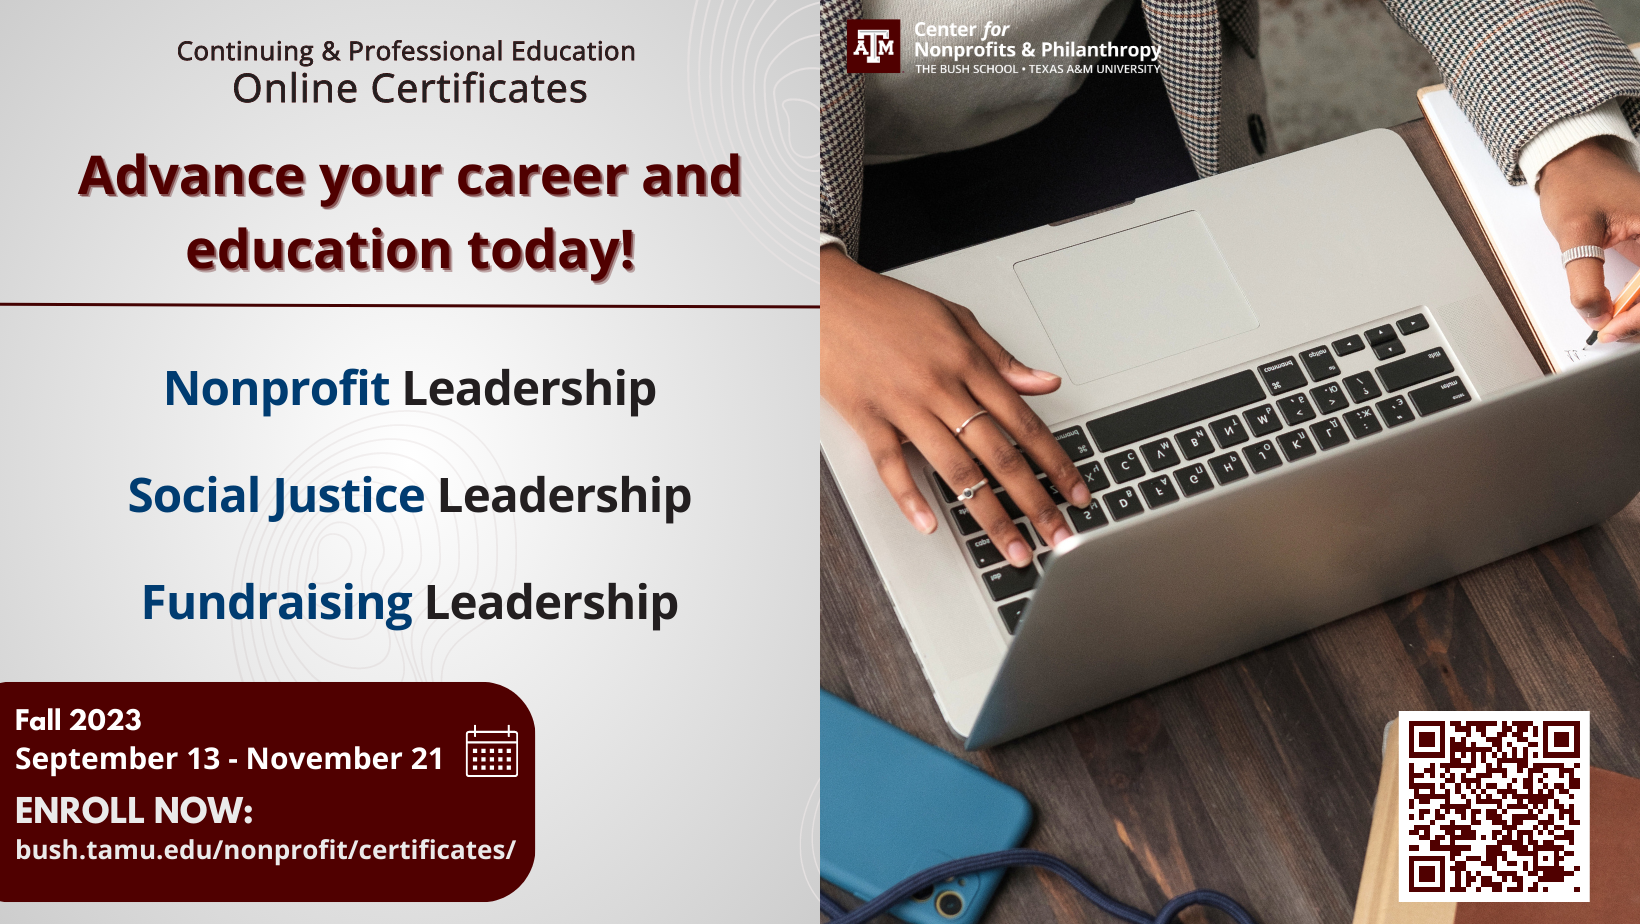 CNP’s Fall Continuing &#038; Professional Education online certificates are now open for enrollment